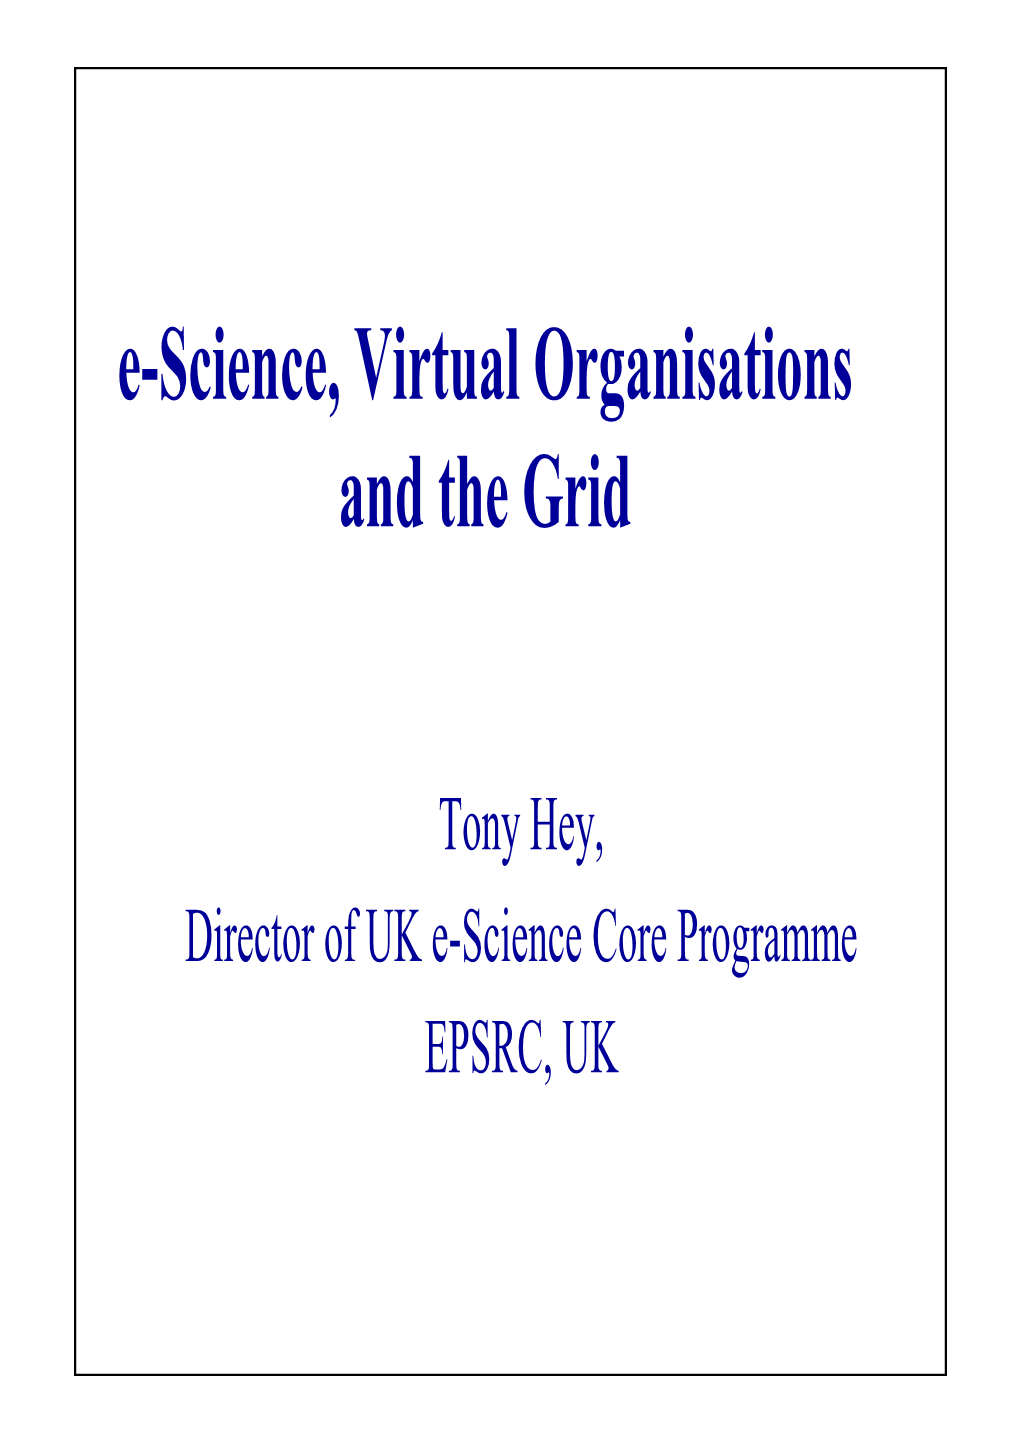 E-Science, Virtual Organisations and the Grid